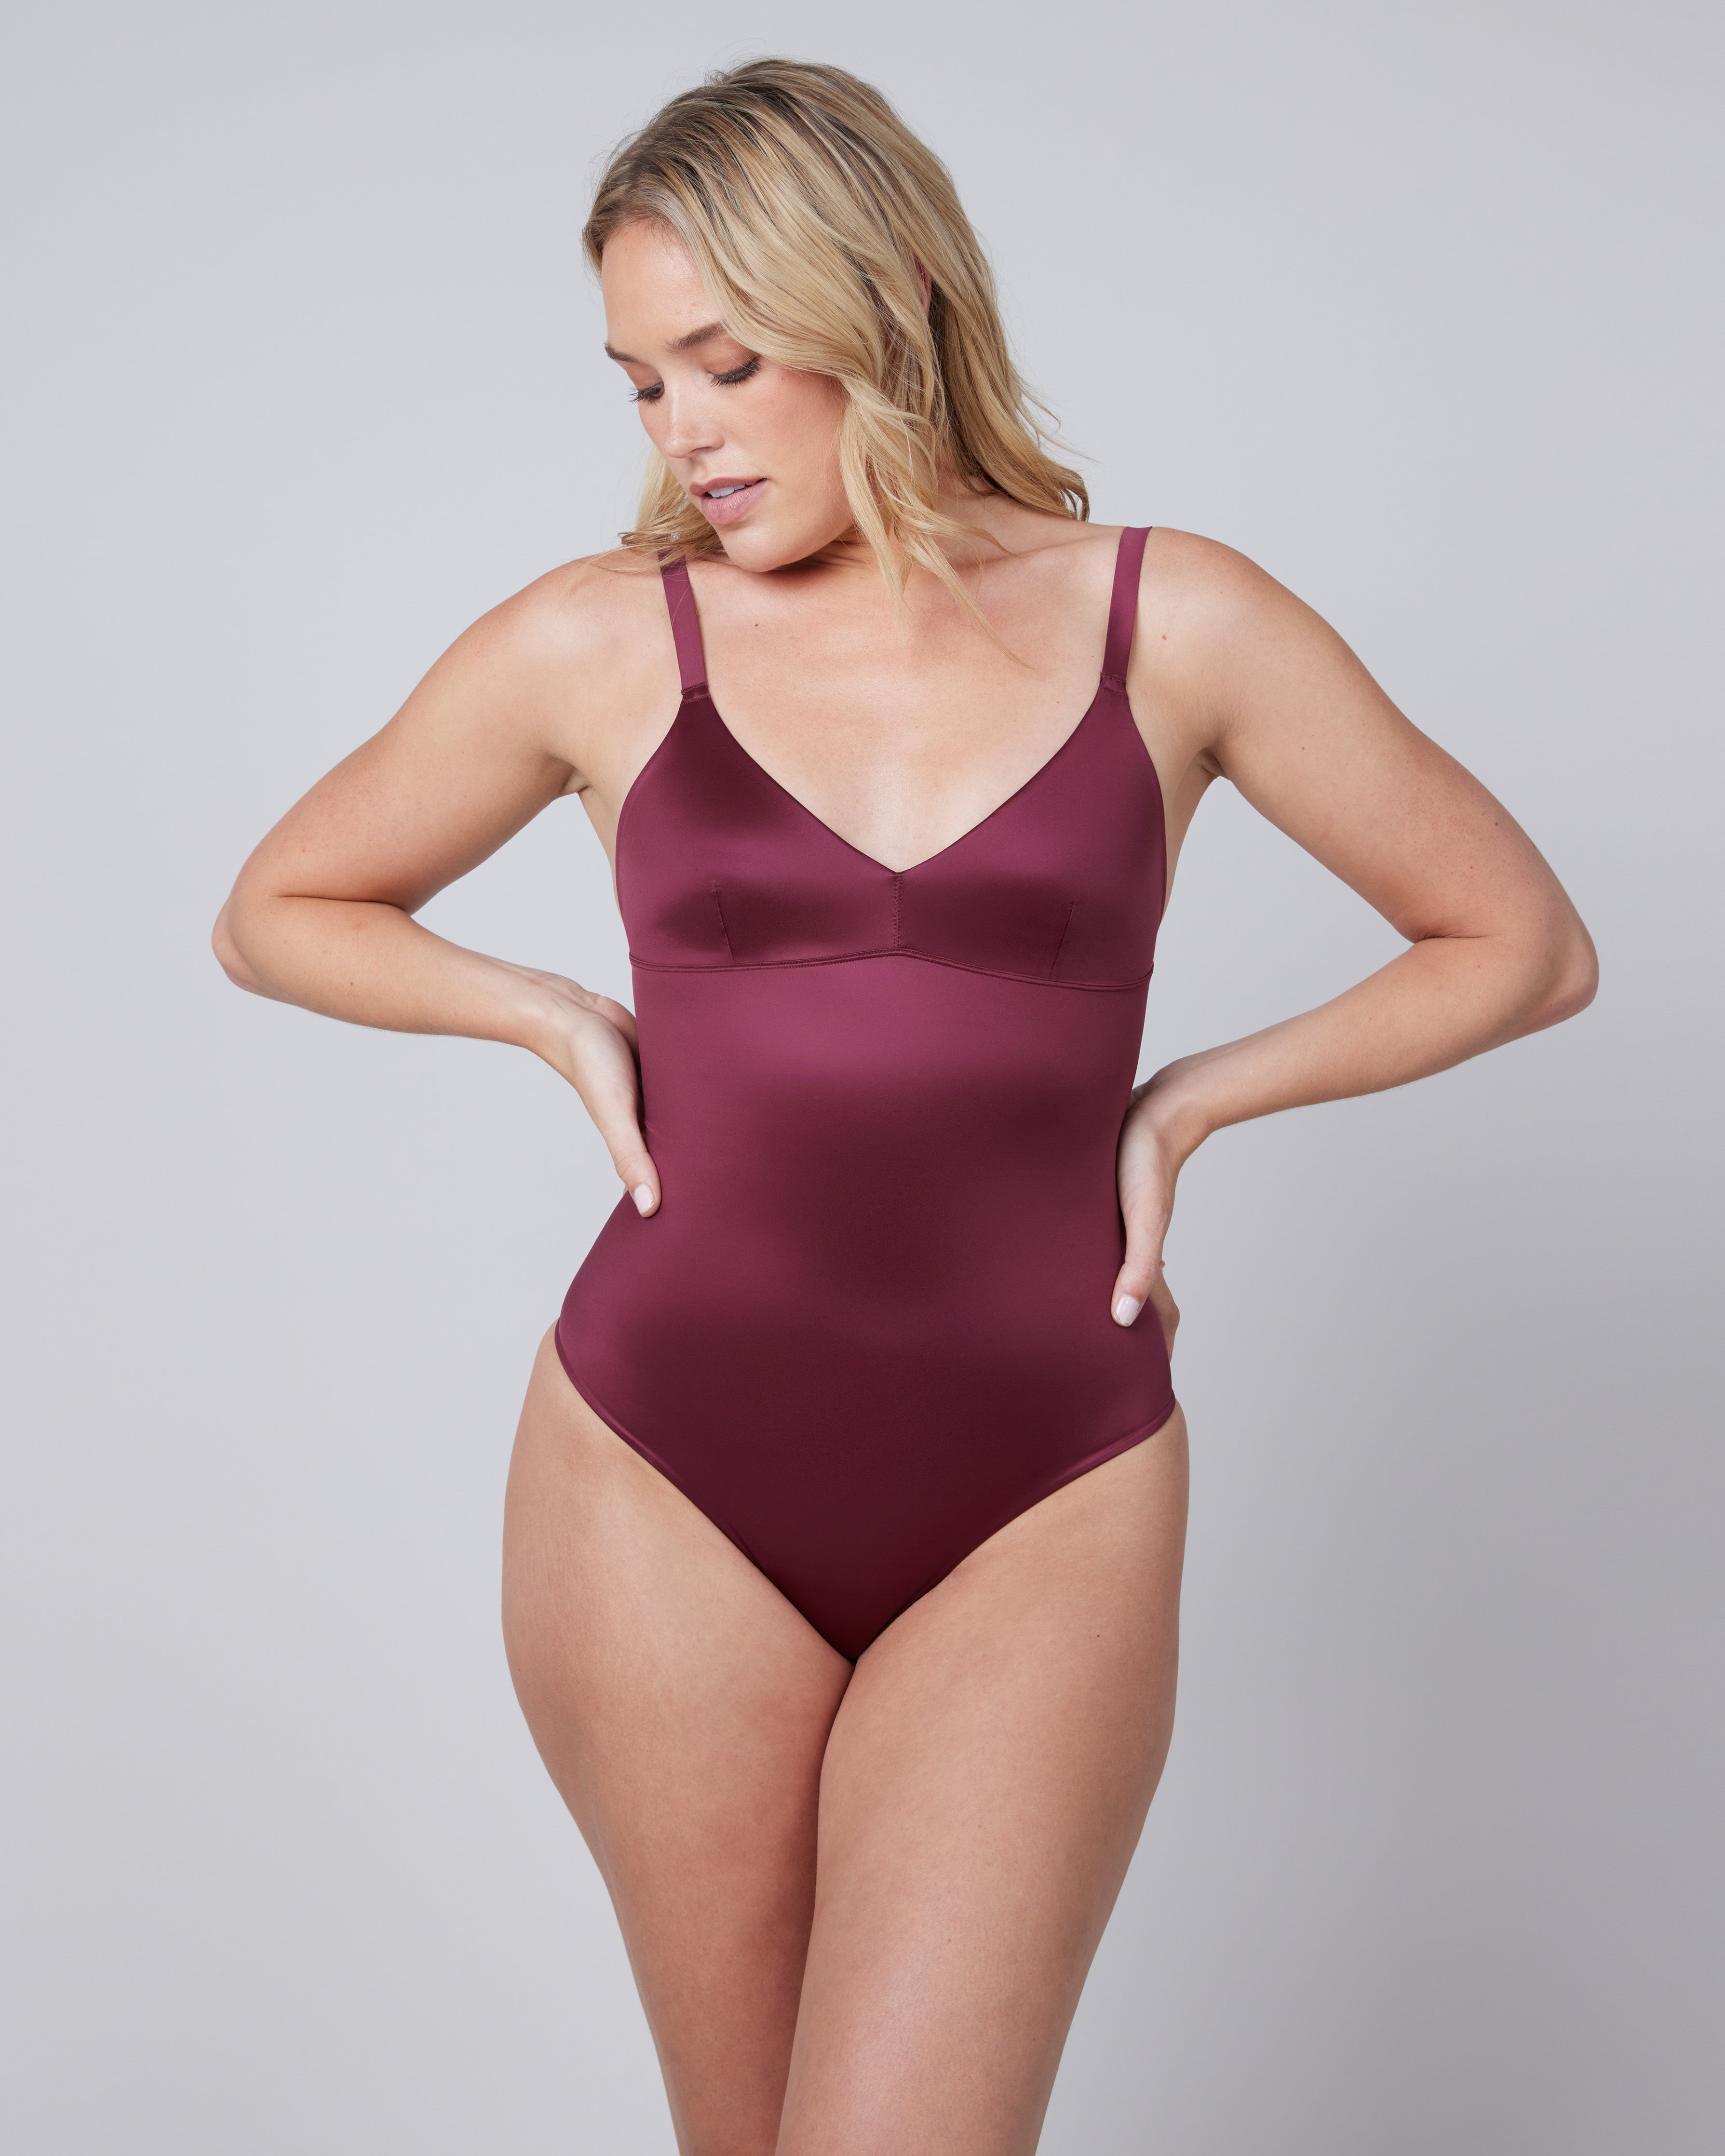 ▷ NWT Assets SPANX Size Small Shaping Open Bust Panty Bodysuit MSRP $39 -  CENTRO COMERCIAL CASTELLANA 200 ◁